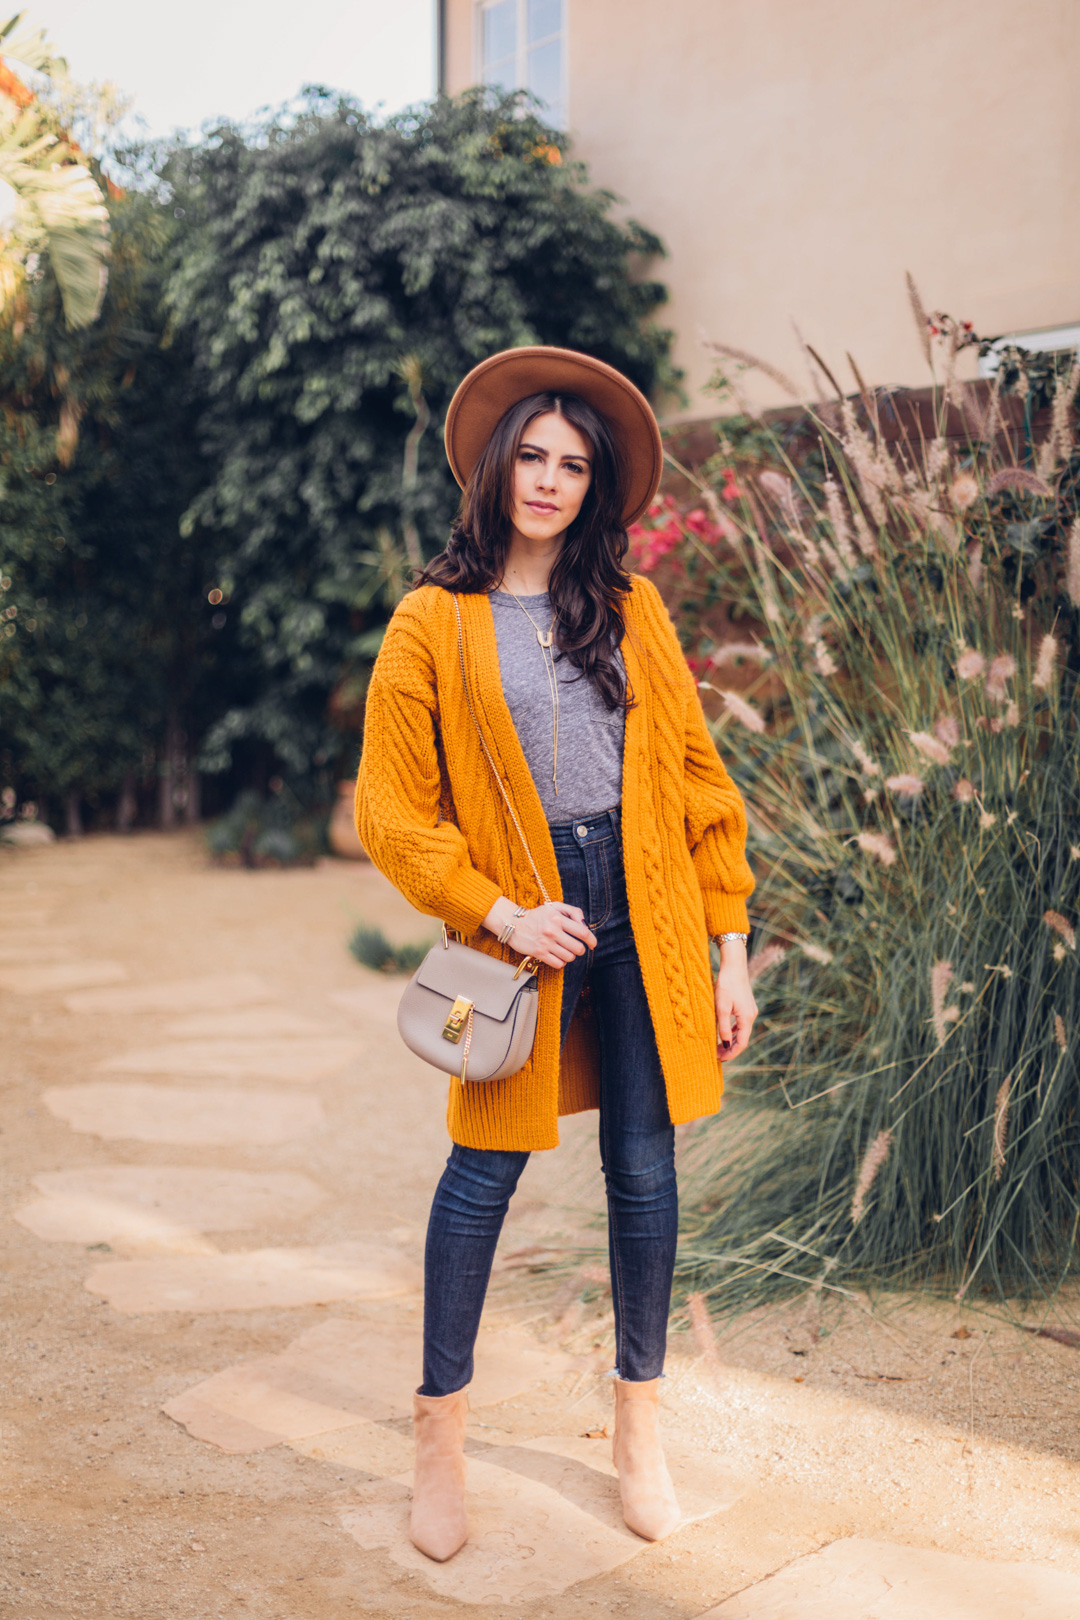 Jackie Roque Salas styles a Topshop yellow cardigan and Fall style look in Malibu.